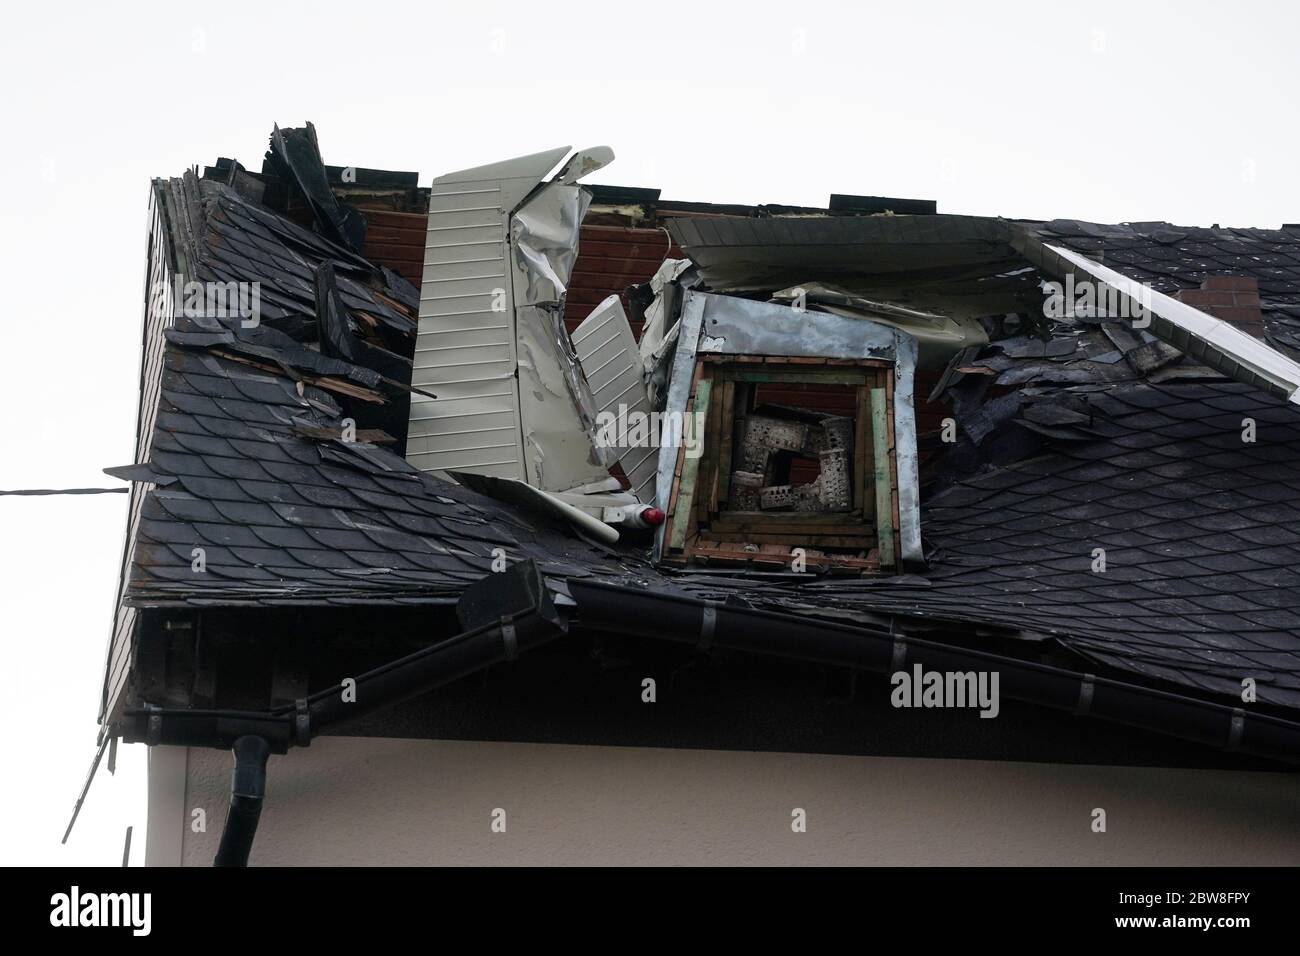 Langenhahn, Germany. 30th May, 2020. Parts of the wreckage of a small airplane protrude from the roof of a residential building. A small plane crashed into the roof of a house in Langenhahn in the Westerwald district on Saturday. The pilot was injured and was taken to hospital, a police spokesperson said. Credit: Thomas Frey/dpa/Alamy Live News Stock Photo